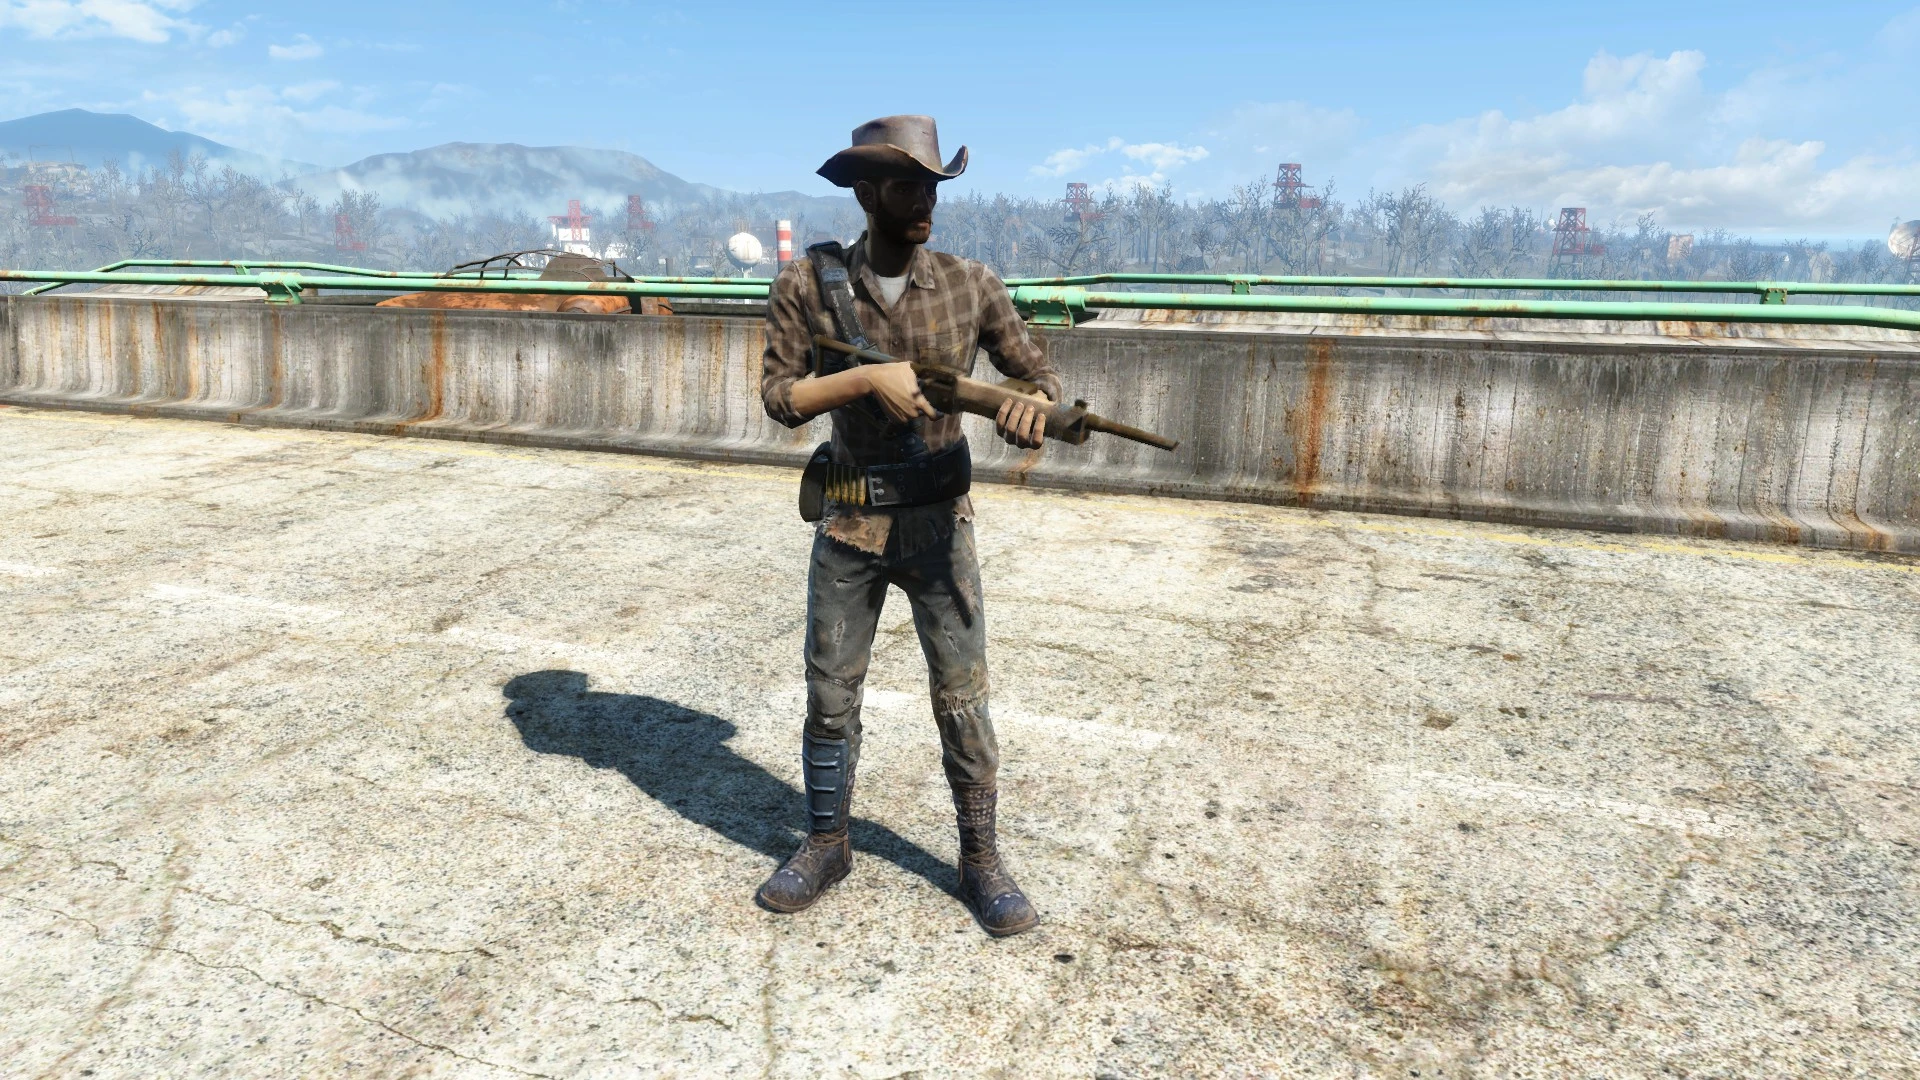 fallout 4 creation club mods free